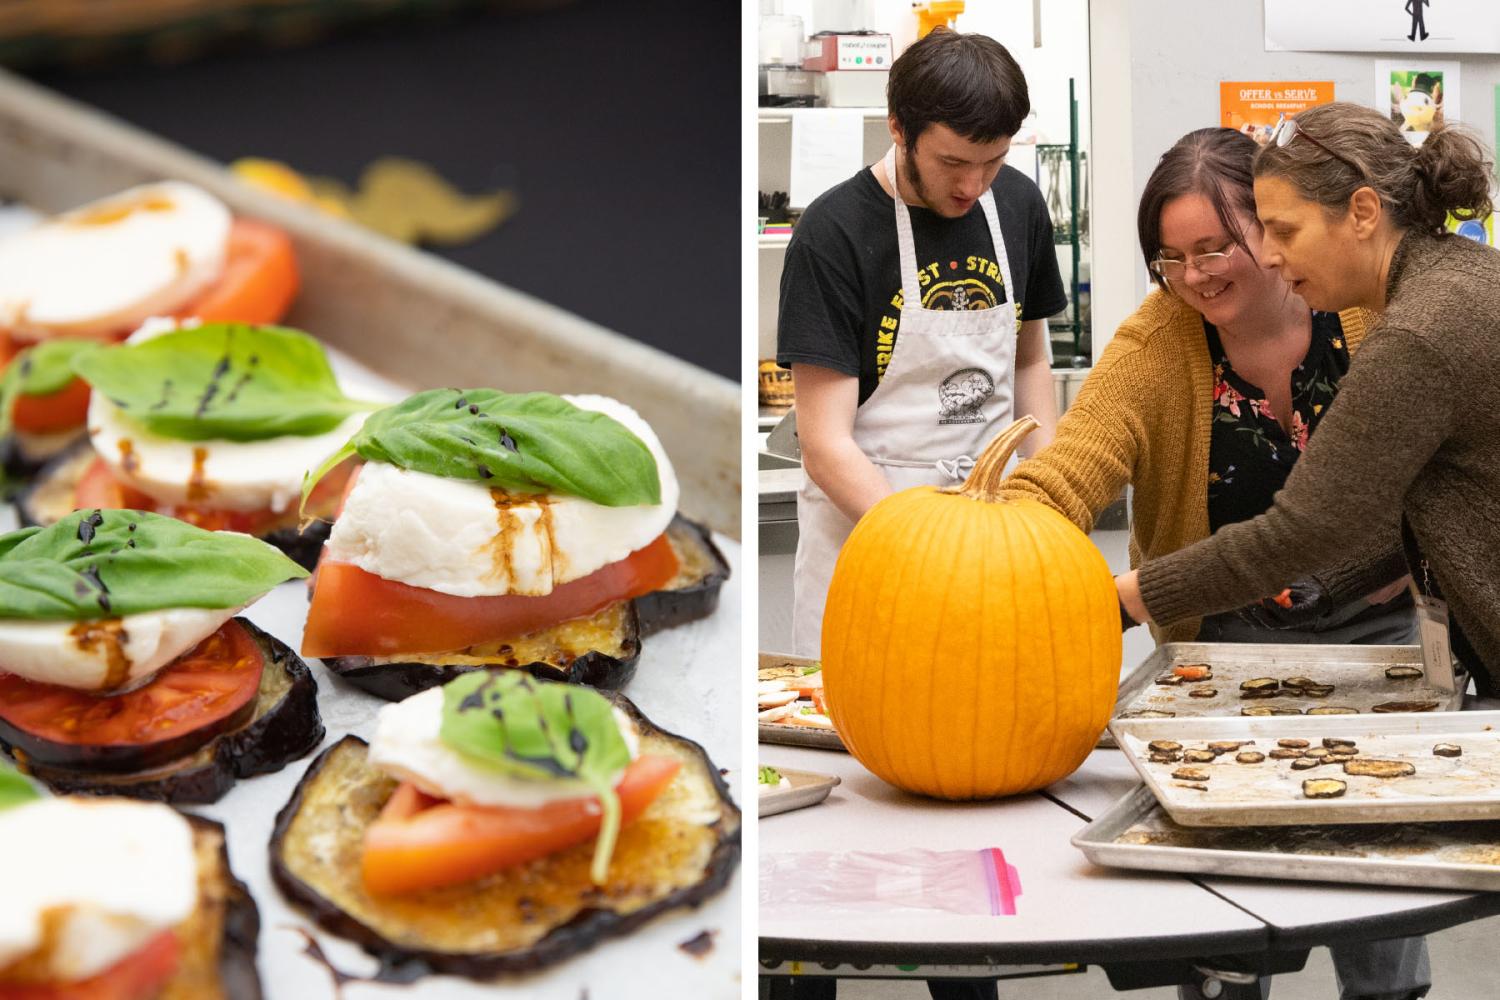 A school garden inspired snack—heirloom tomatoes, basil, and eggplant with student-made mozzarella—is prepared by students and staff before the event.